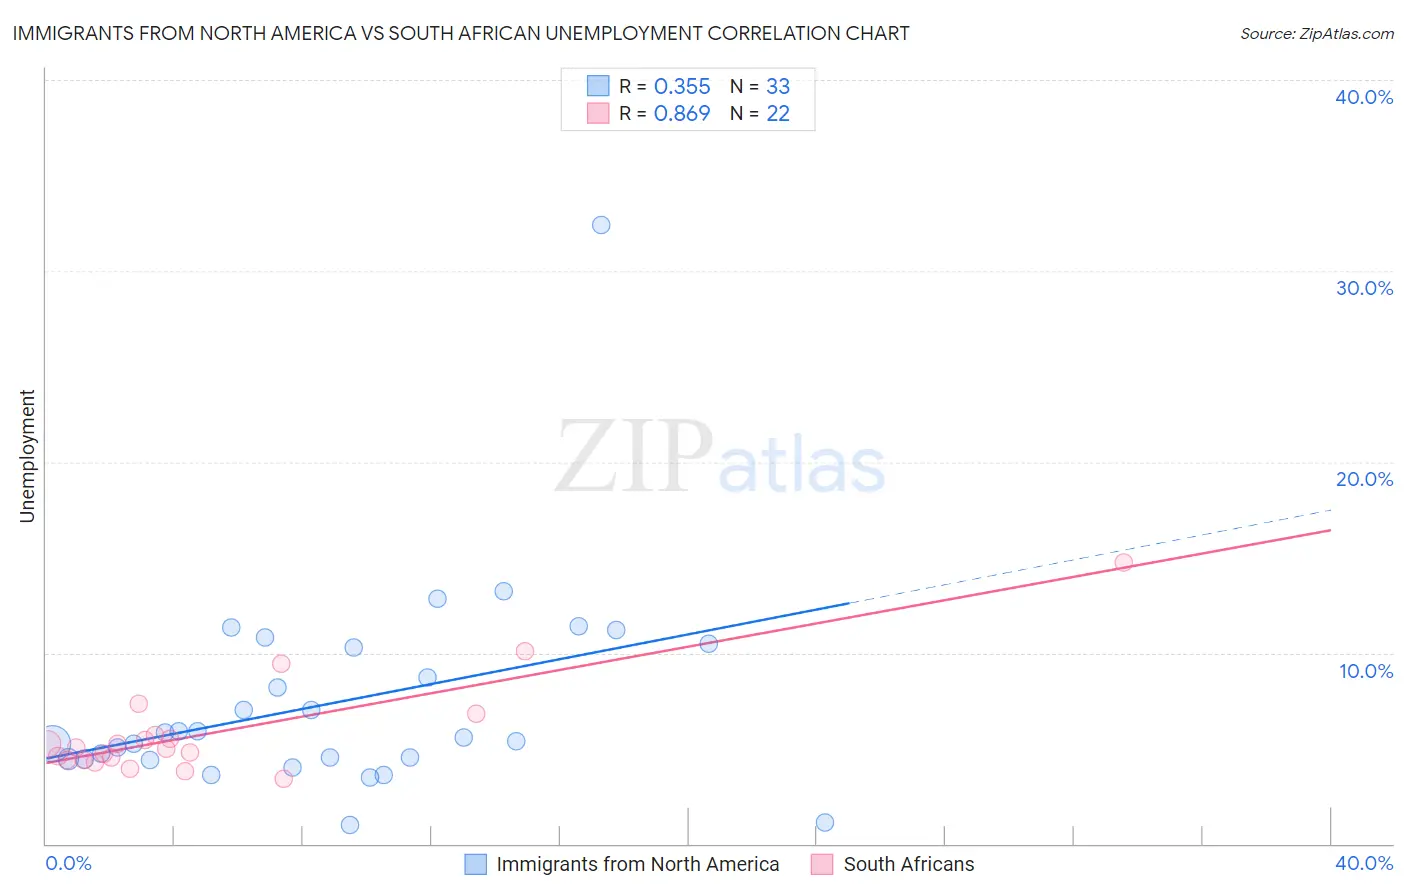 Immigrants from North America vs South African Unemployment